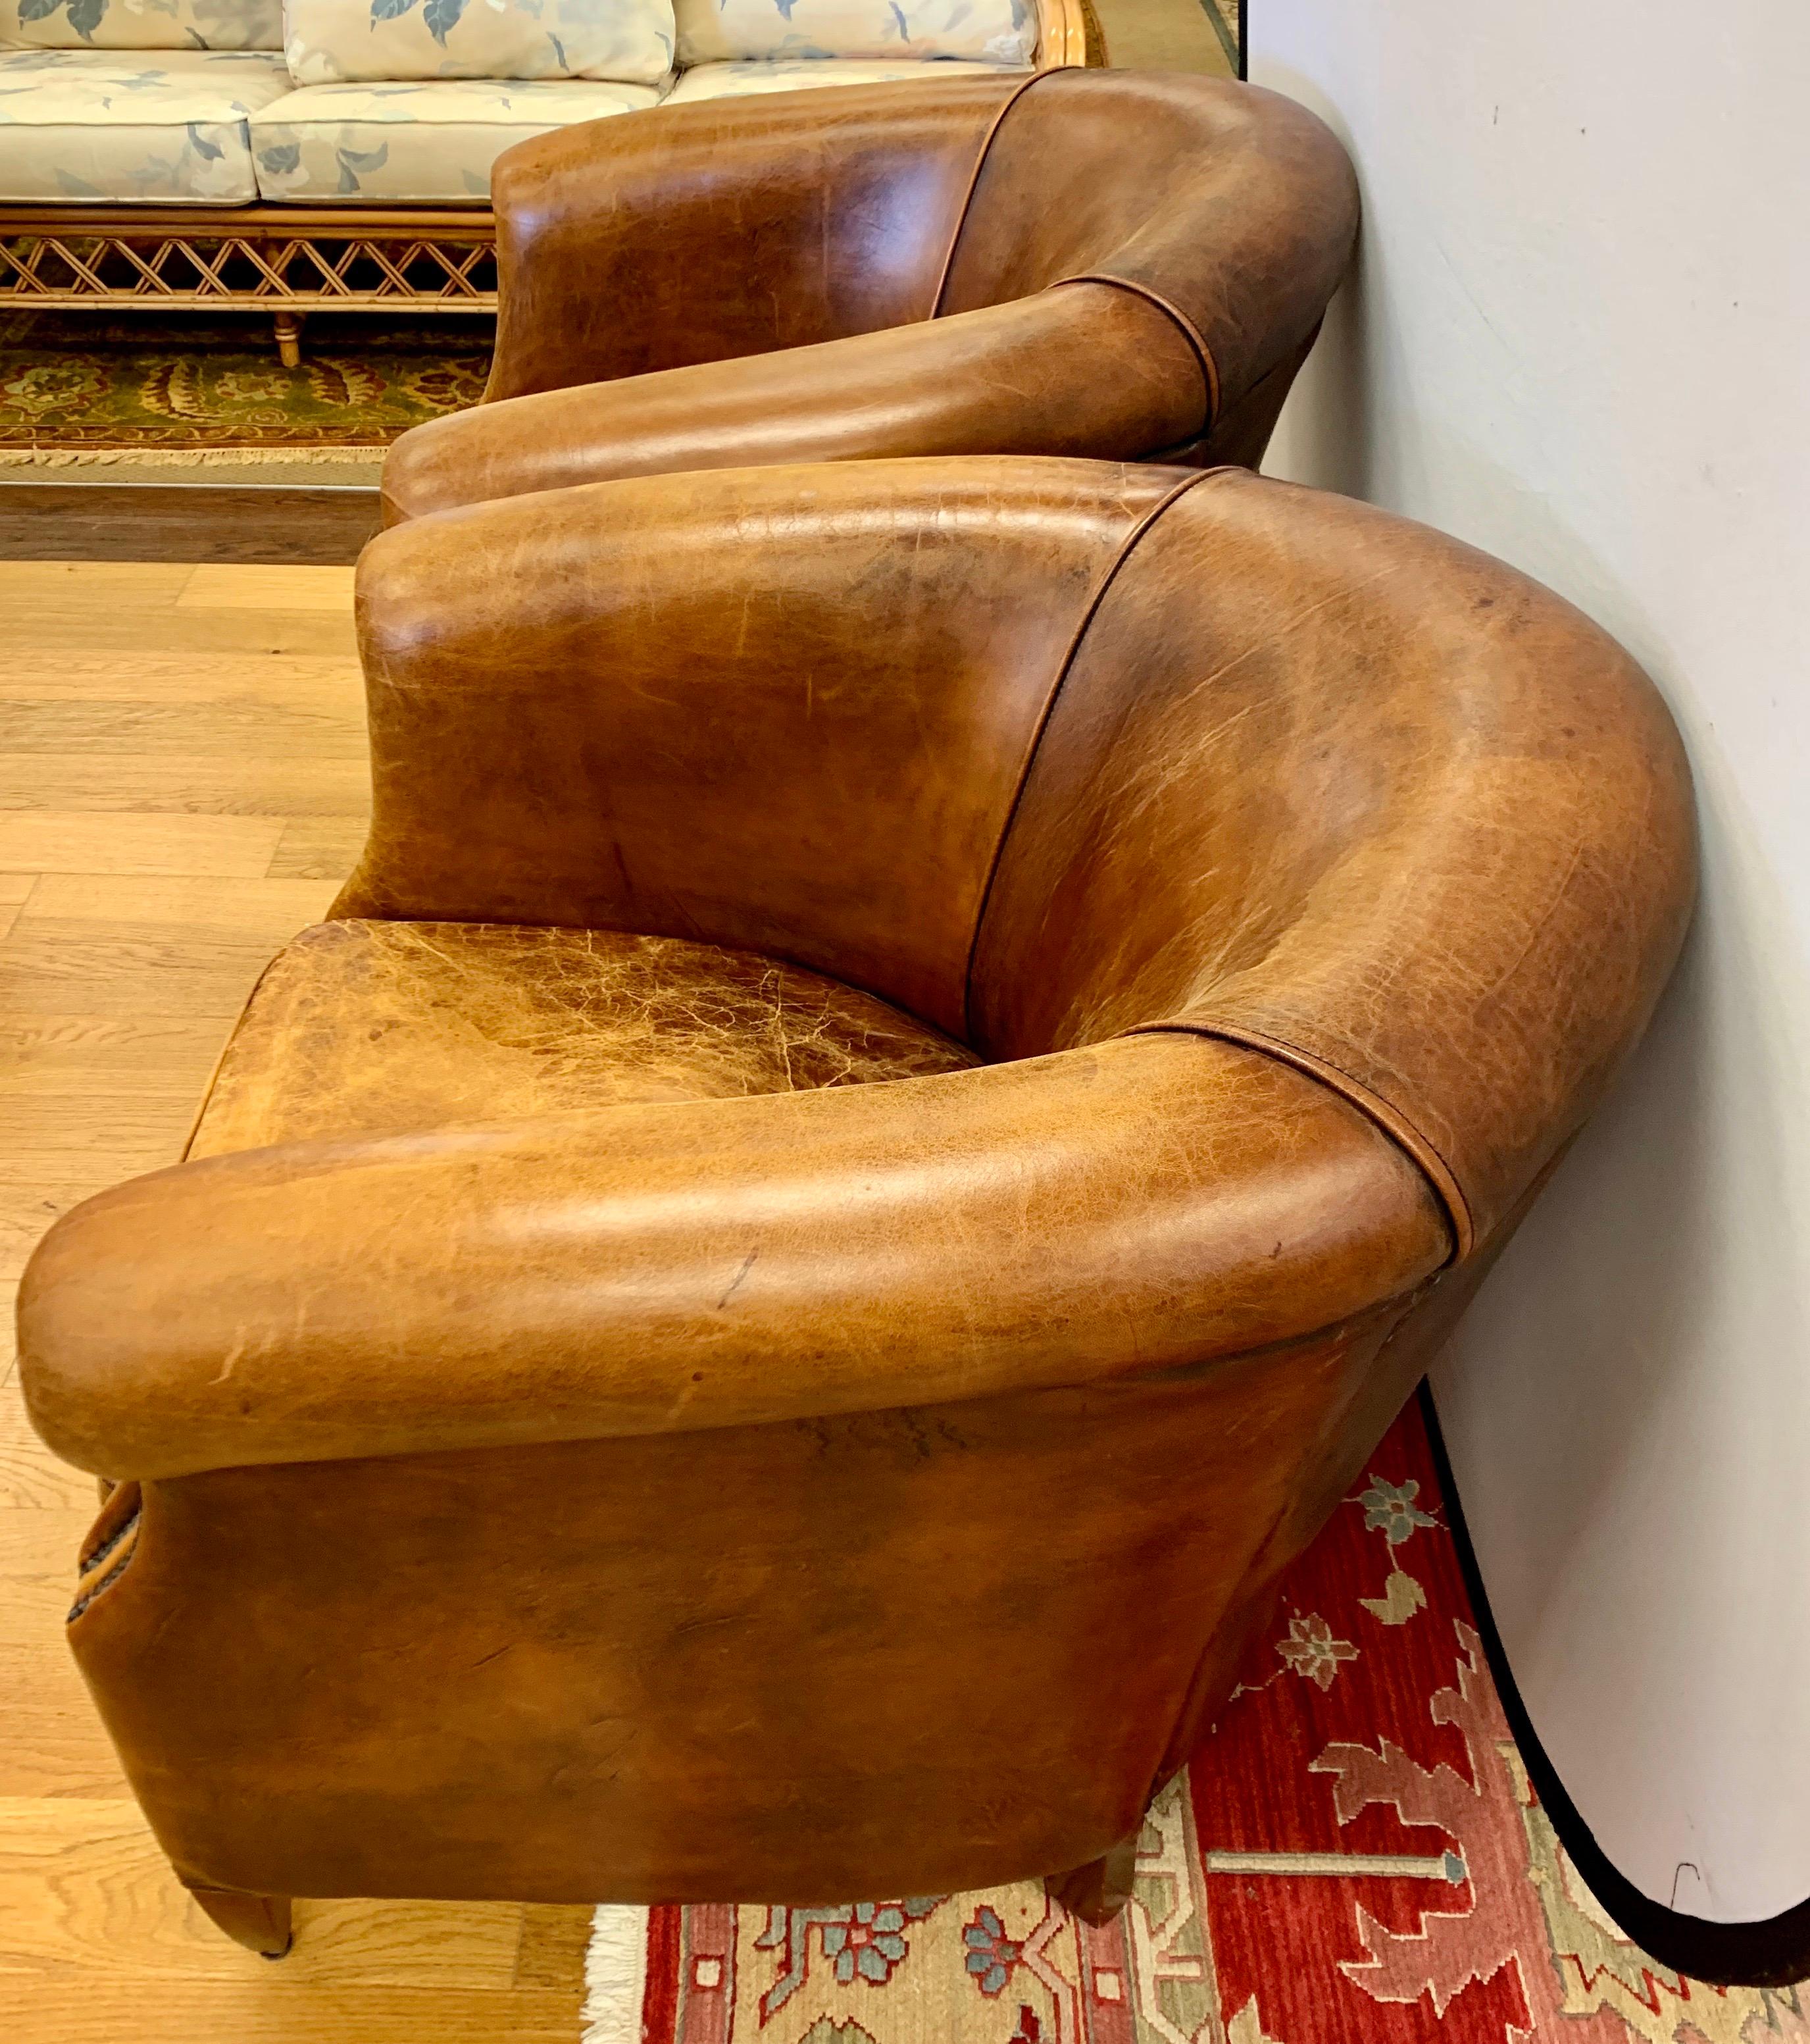 leather cigar lounge chairs